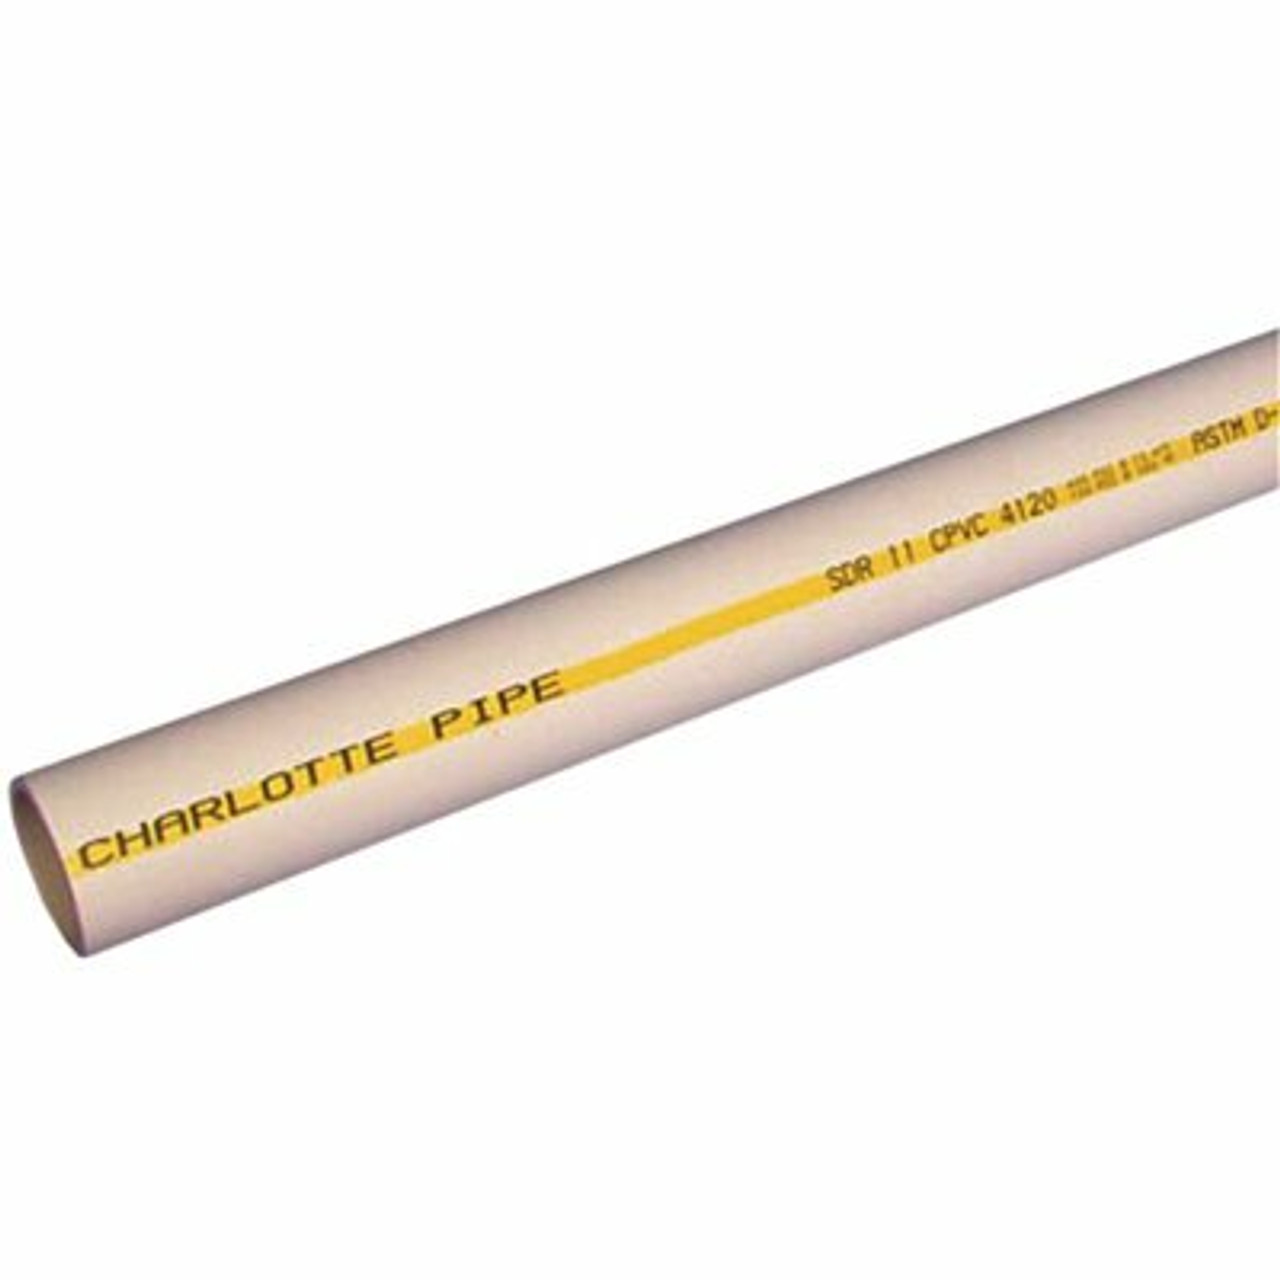 Charlotte Pipe 1 In. X 20 Ft. Cpvc Sdr11 Flowguard Gold Pipe